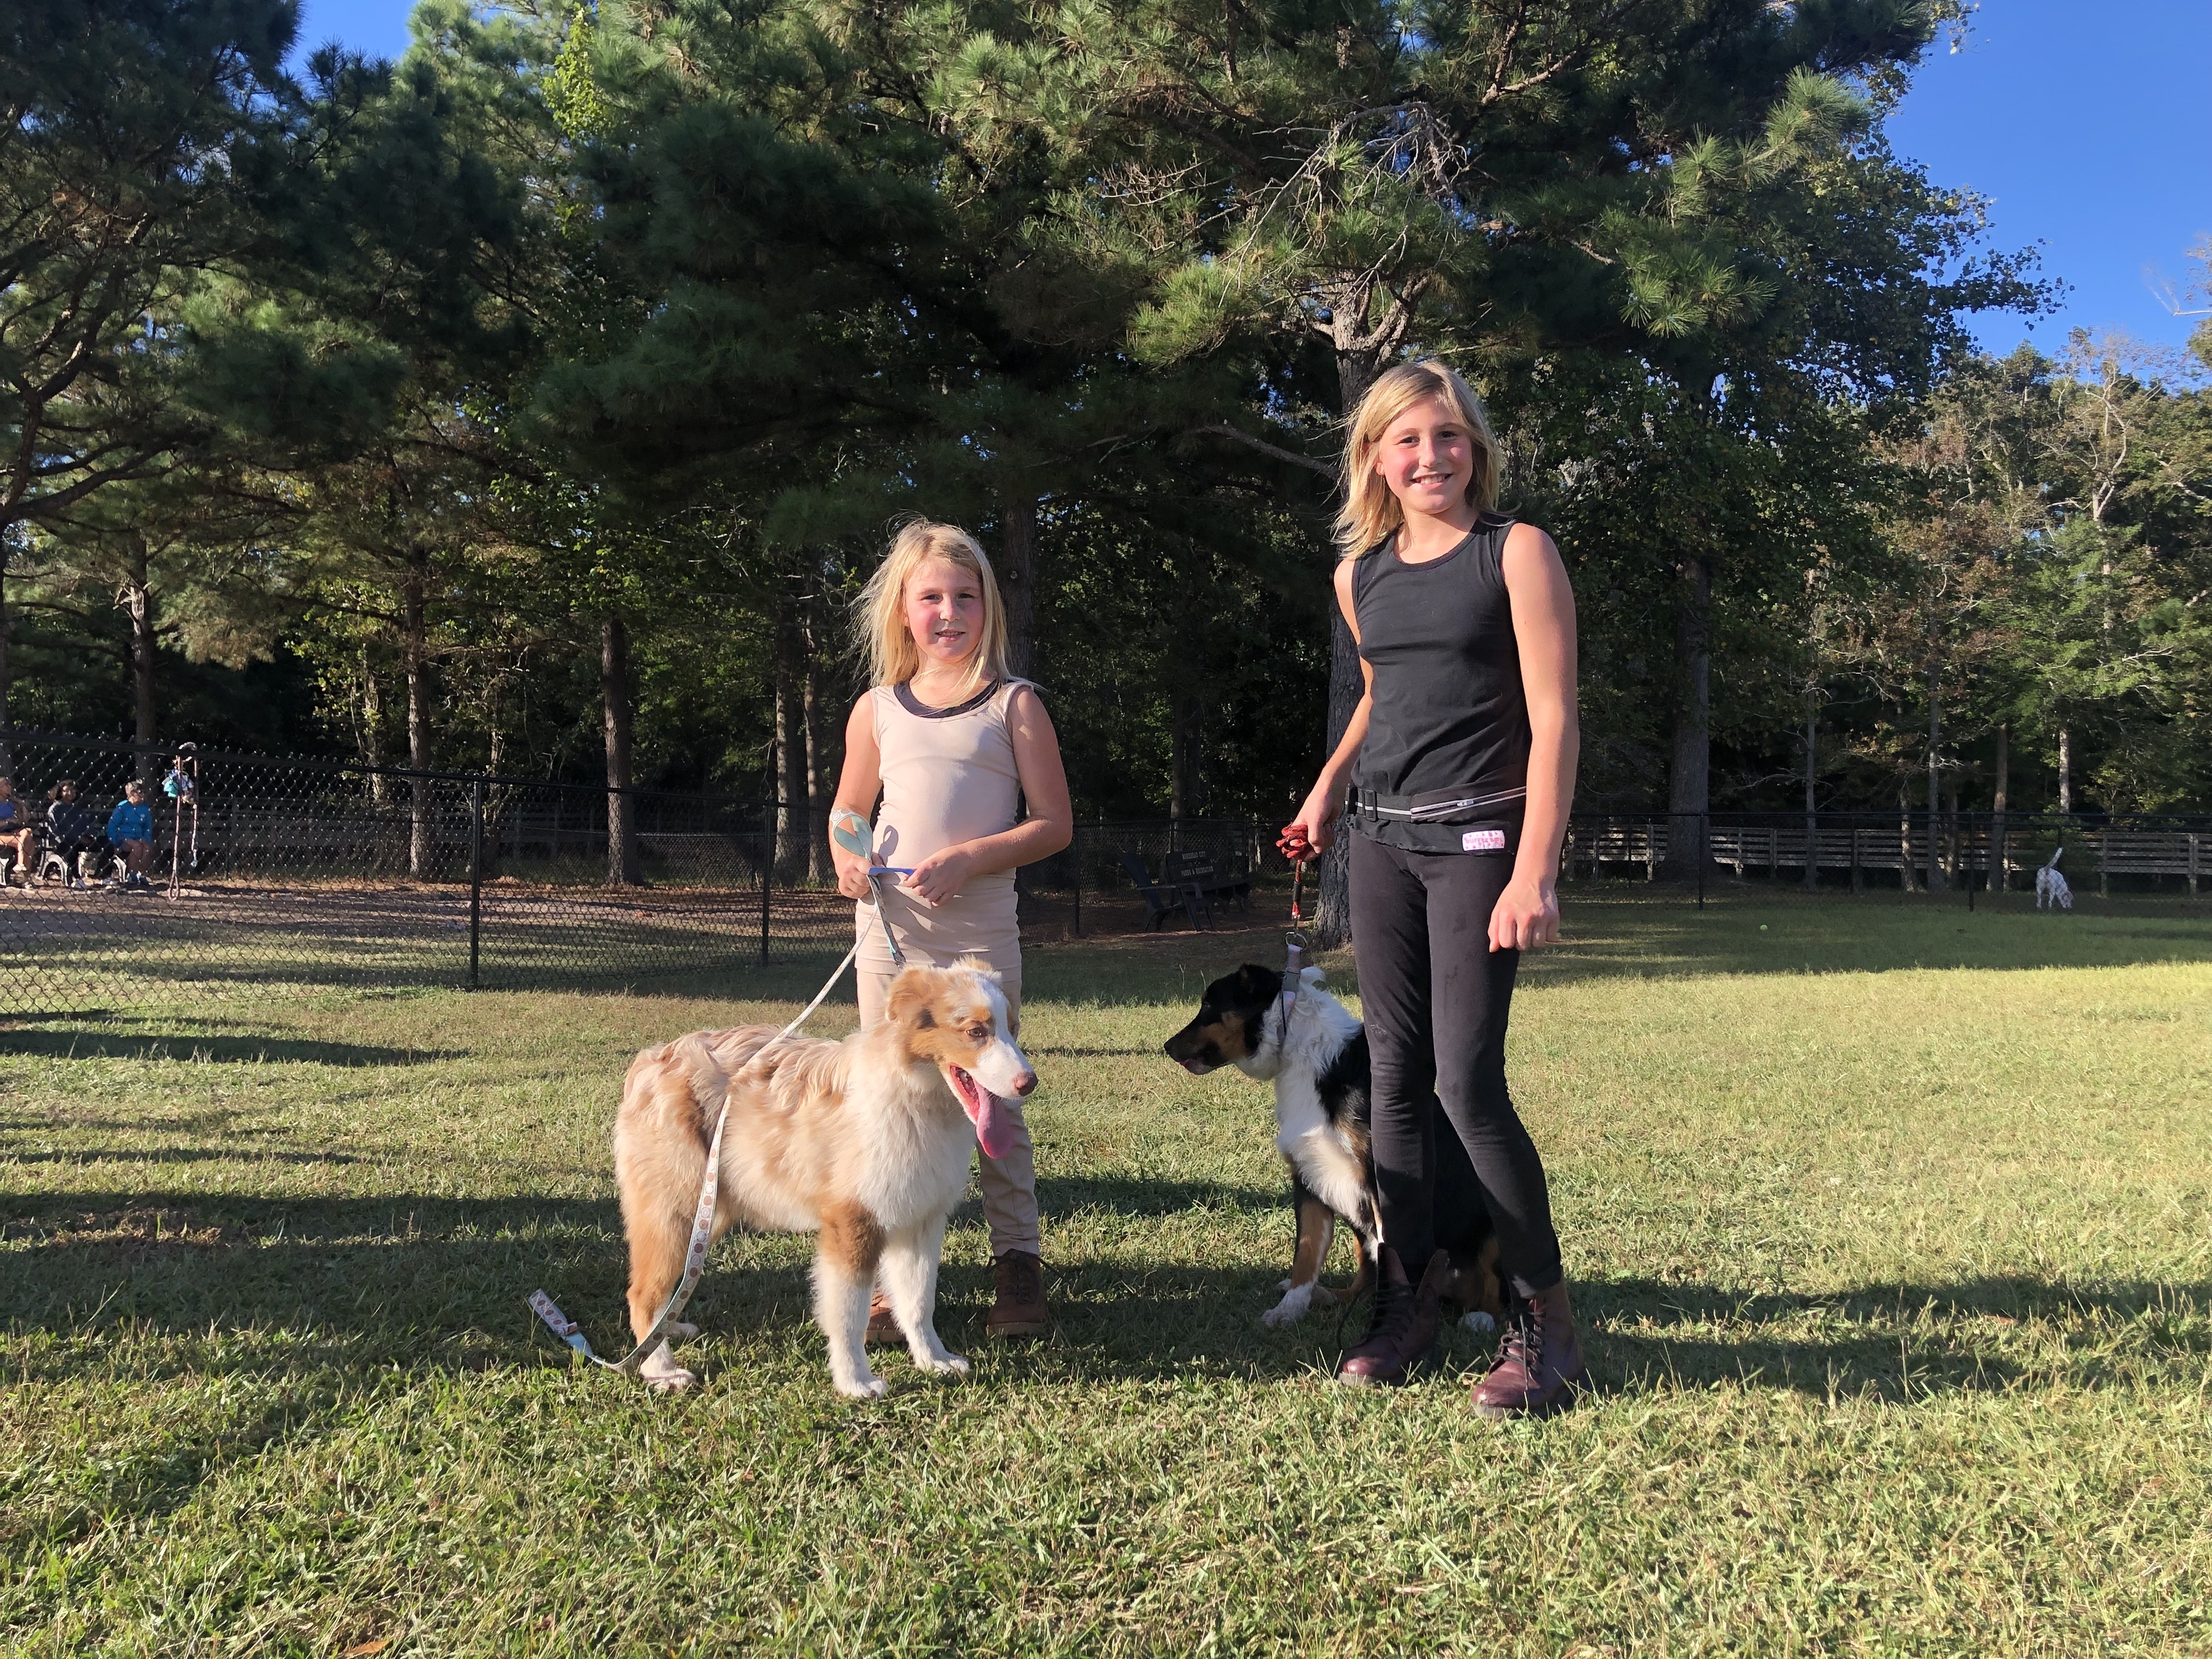 Madeleine and Felicity Tedder with their dogs